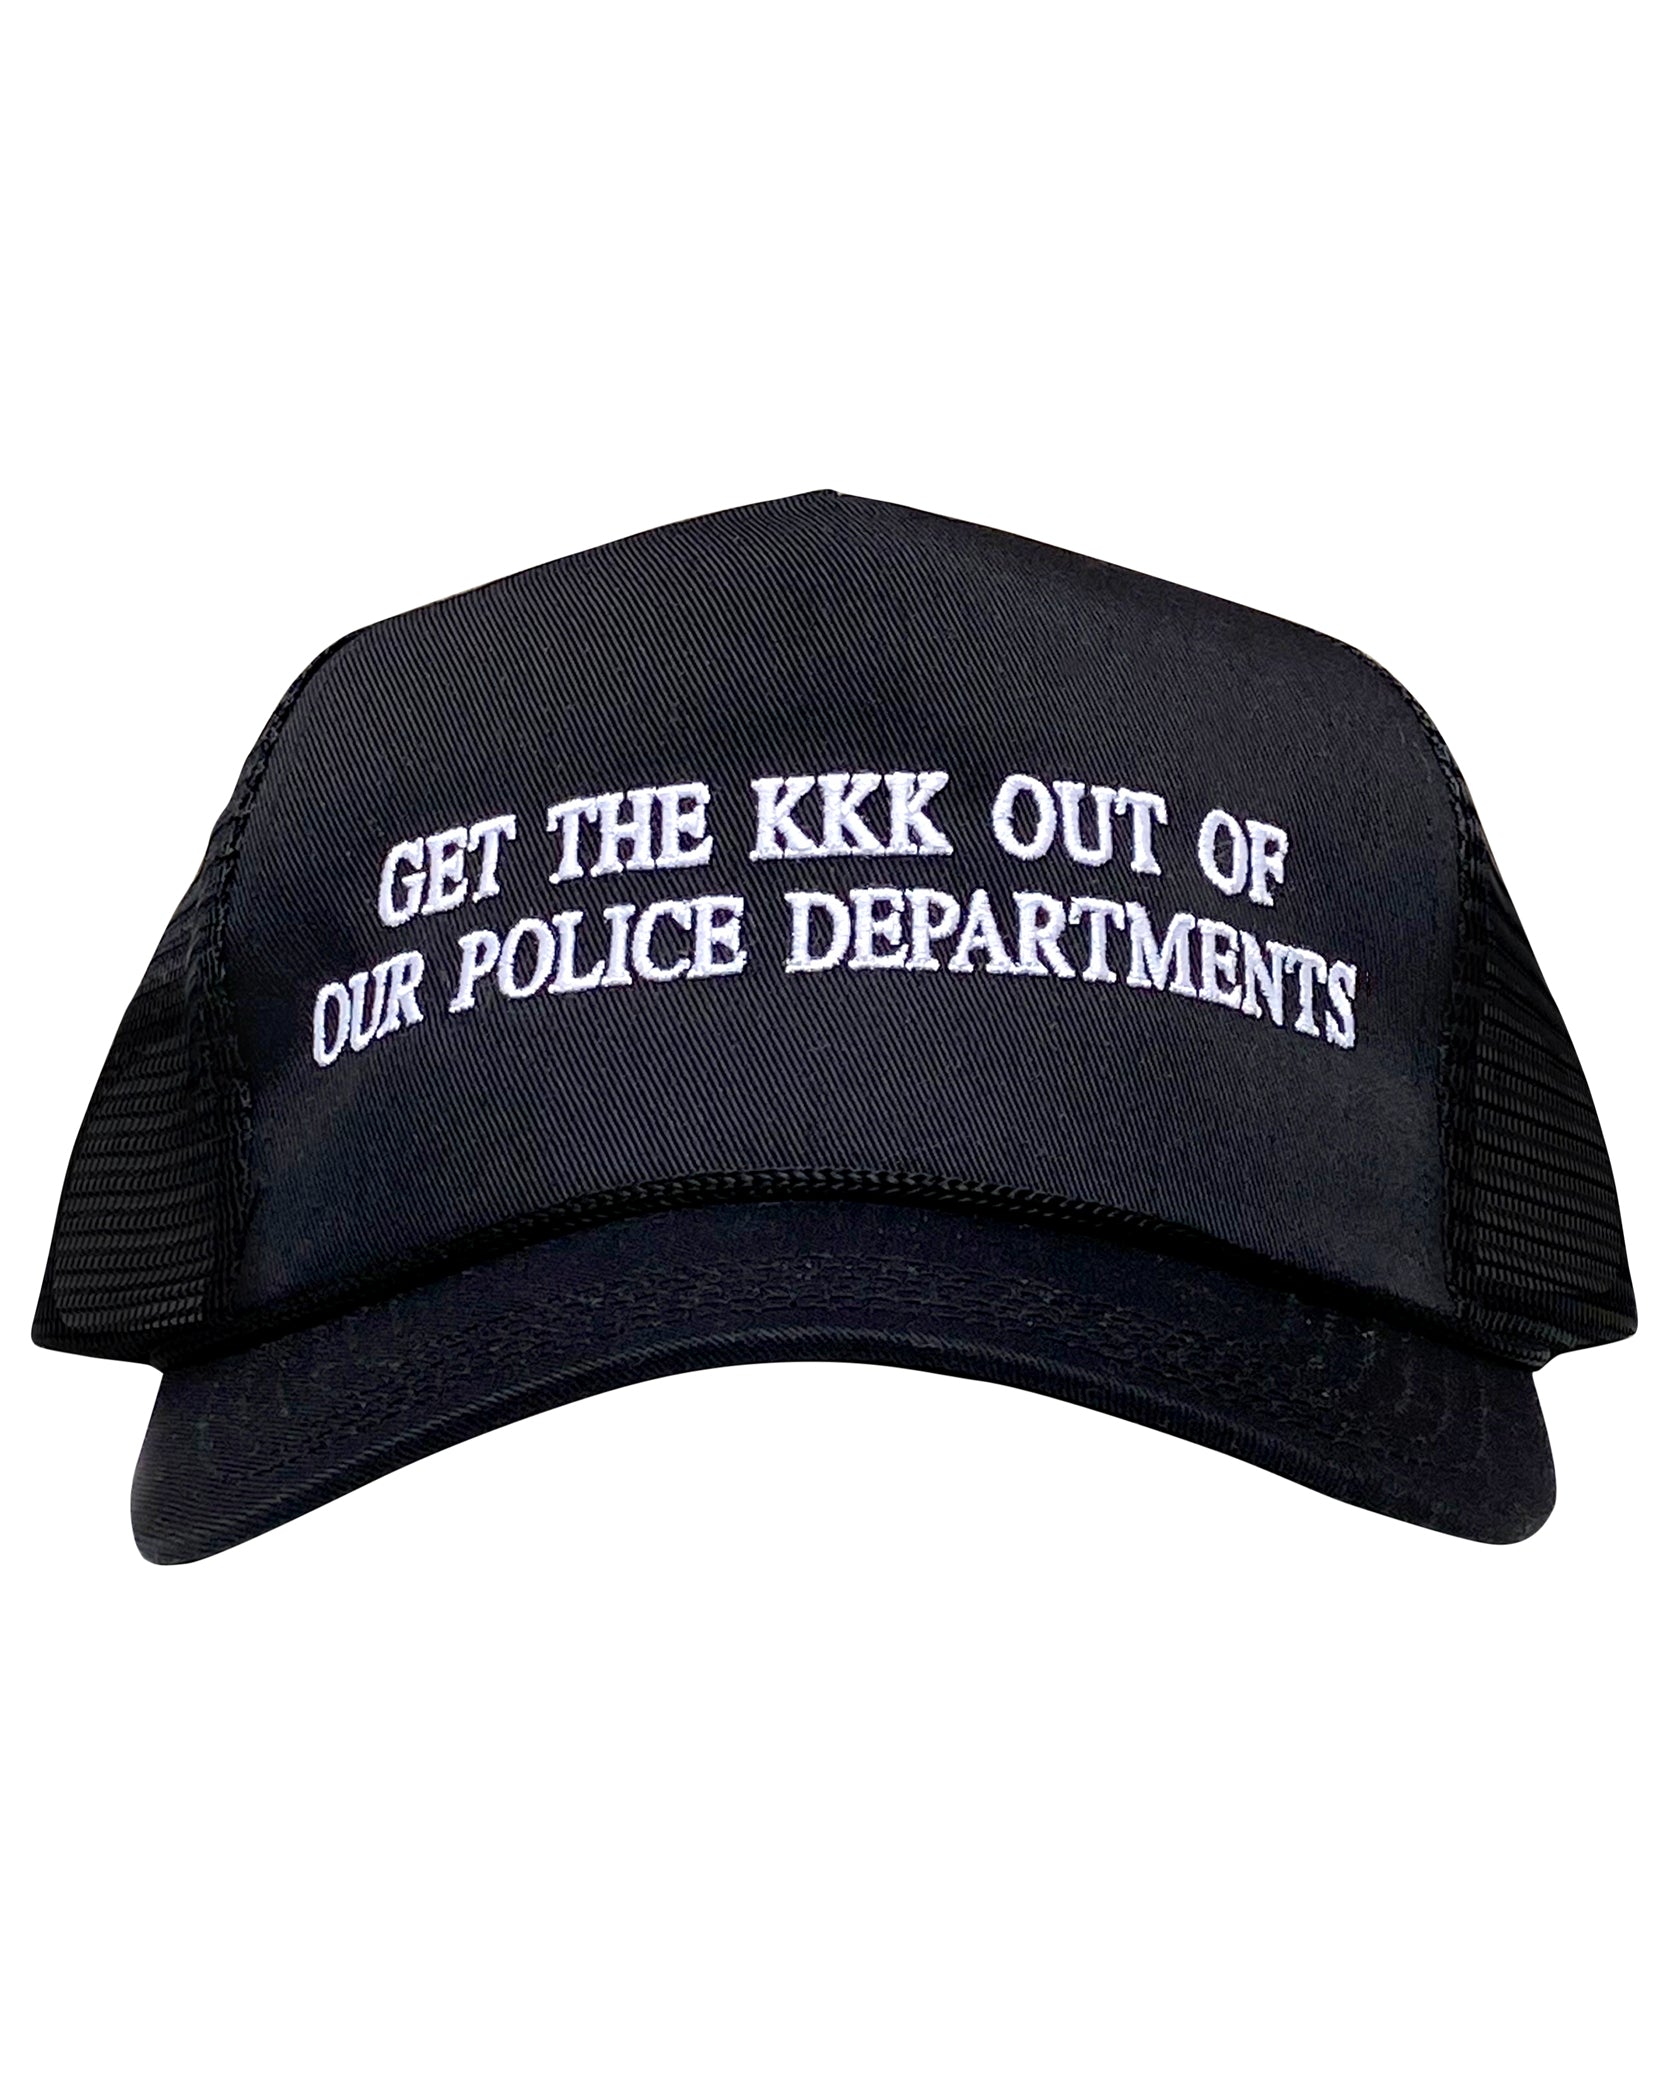 Get The KKK Out Of Our Police Departments Hat